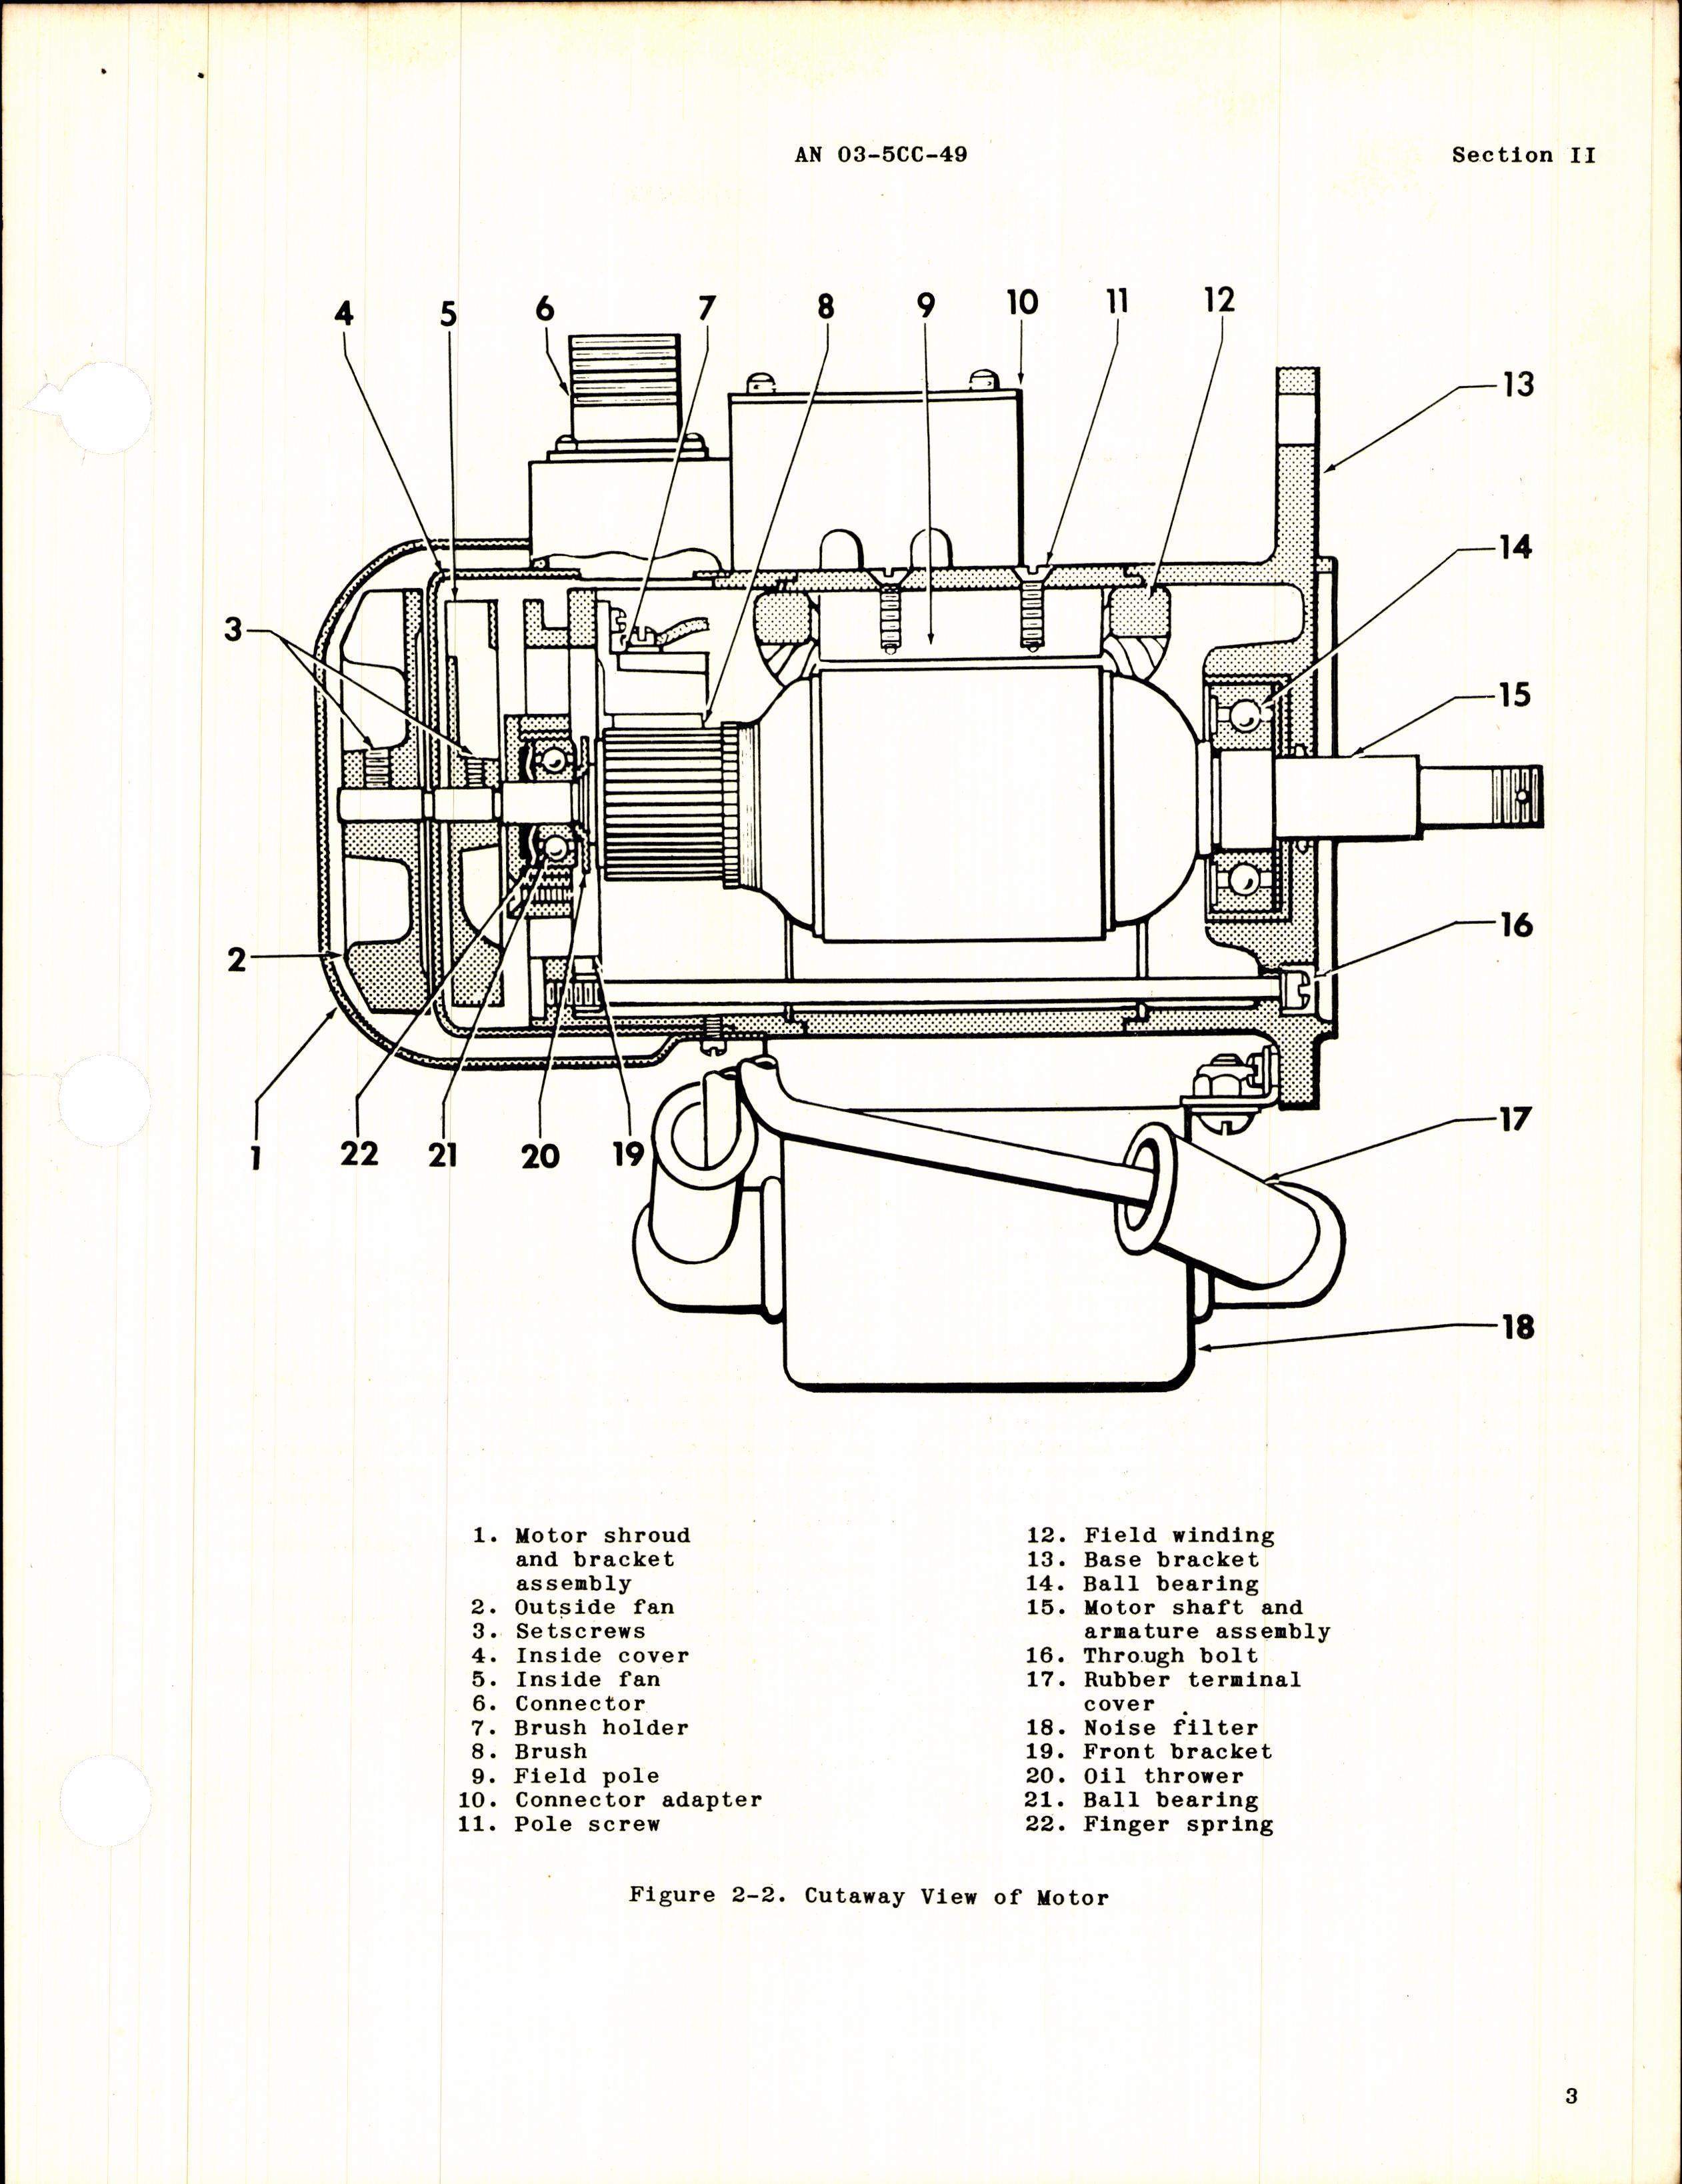 Sample page 7 from AirCorps Library document: Overhaul Instructions for Westinghouse Electric Motor